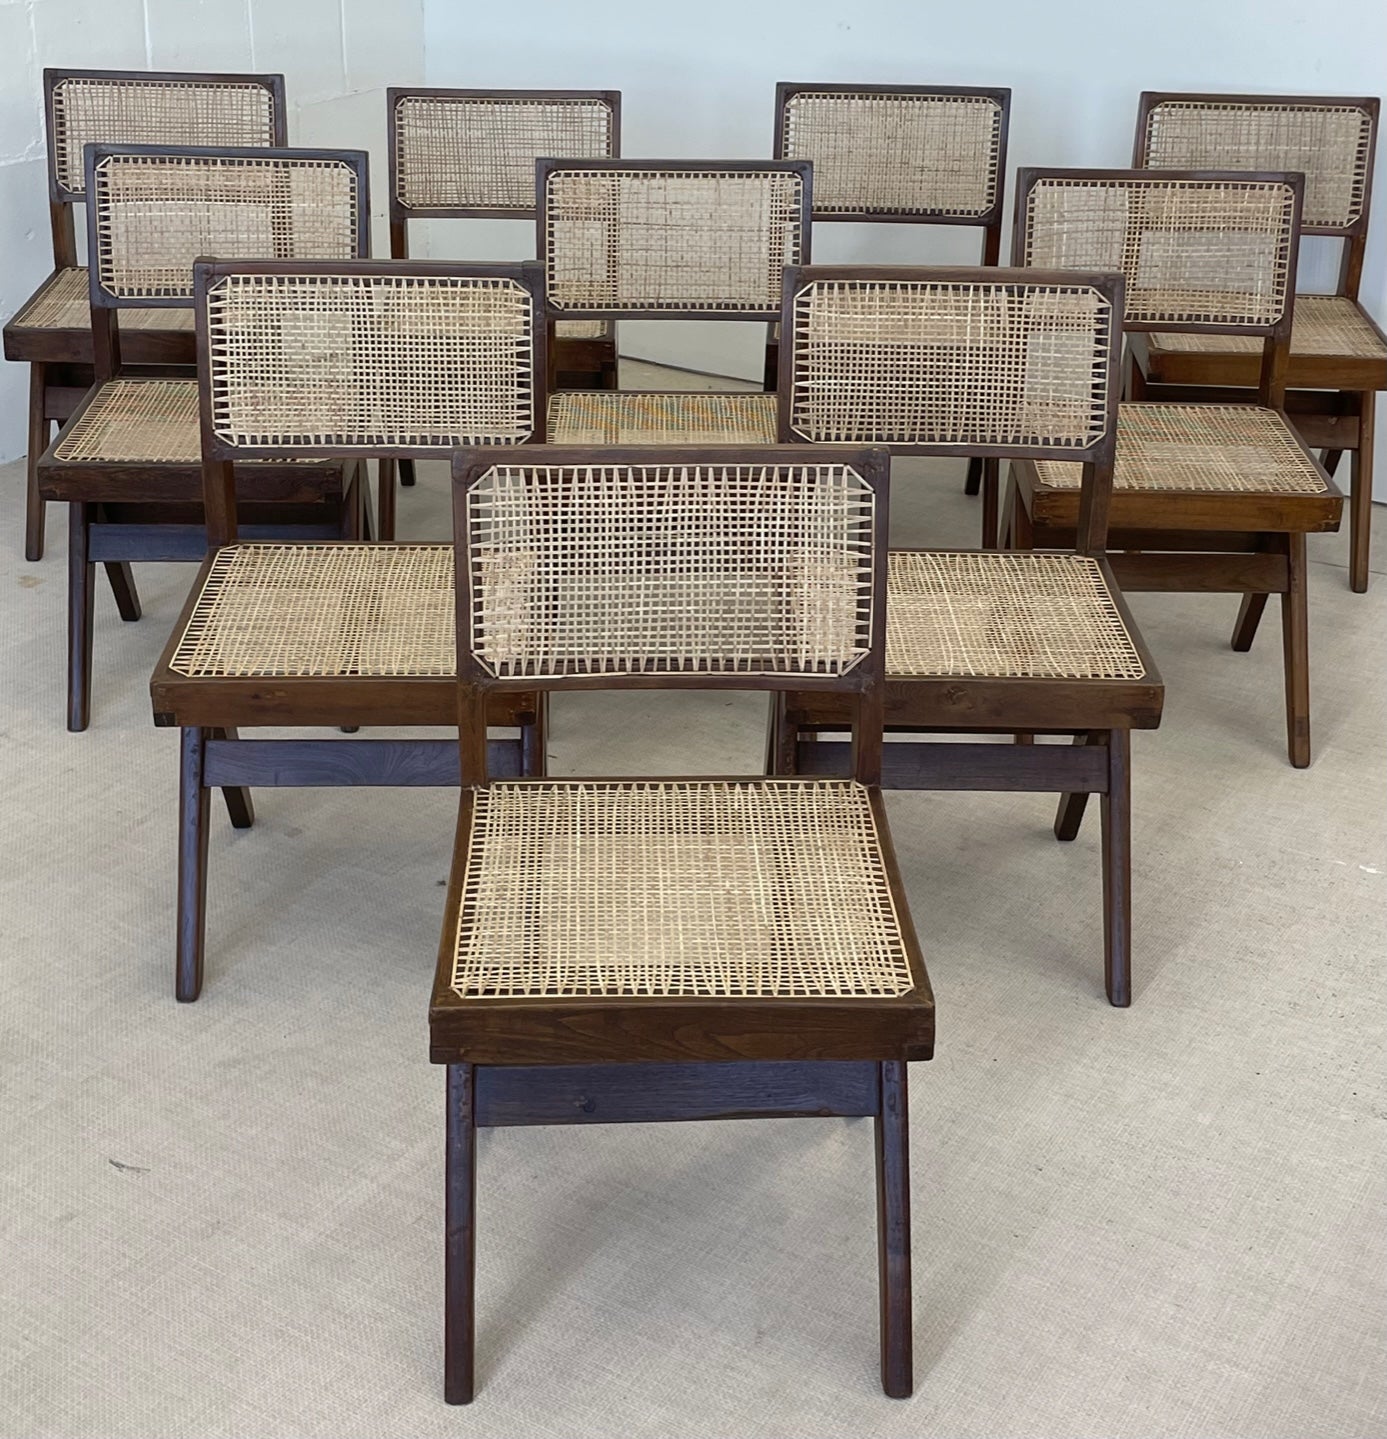 10 Pierre Jeanneret Armless Dining Chairs, Teak, Cane, France/India